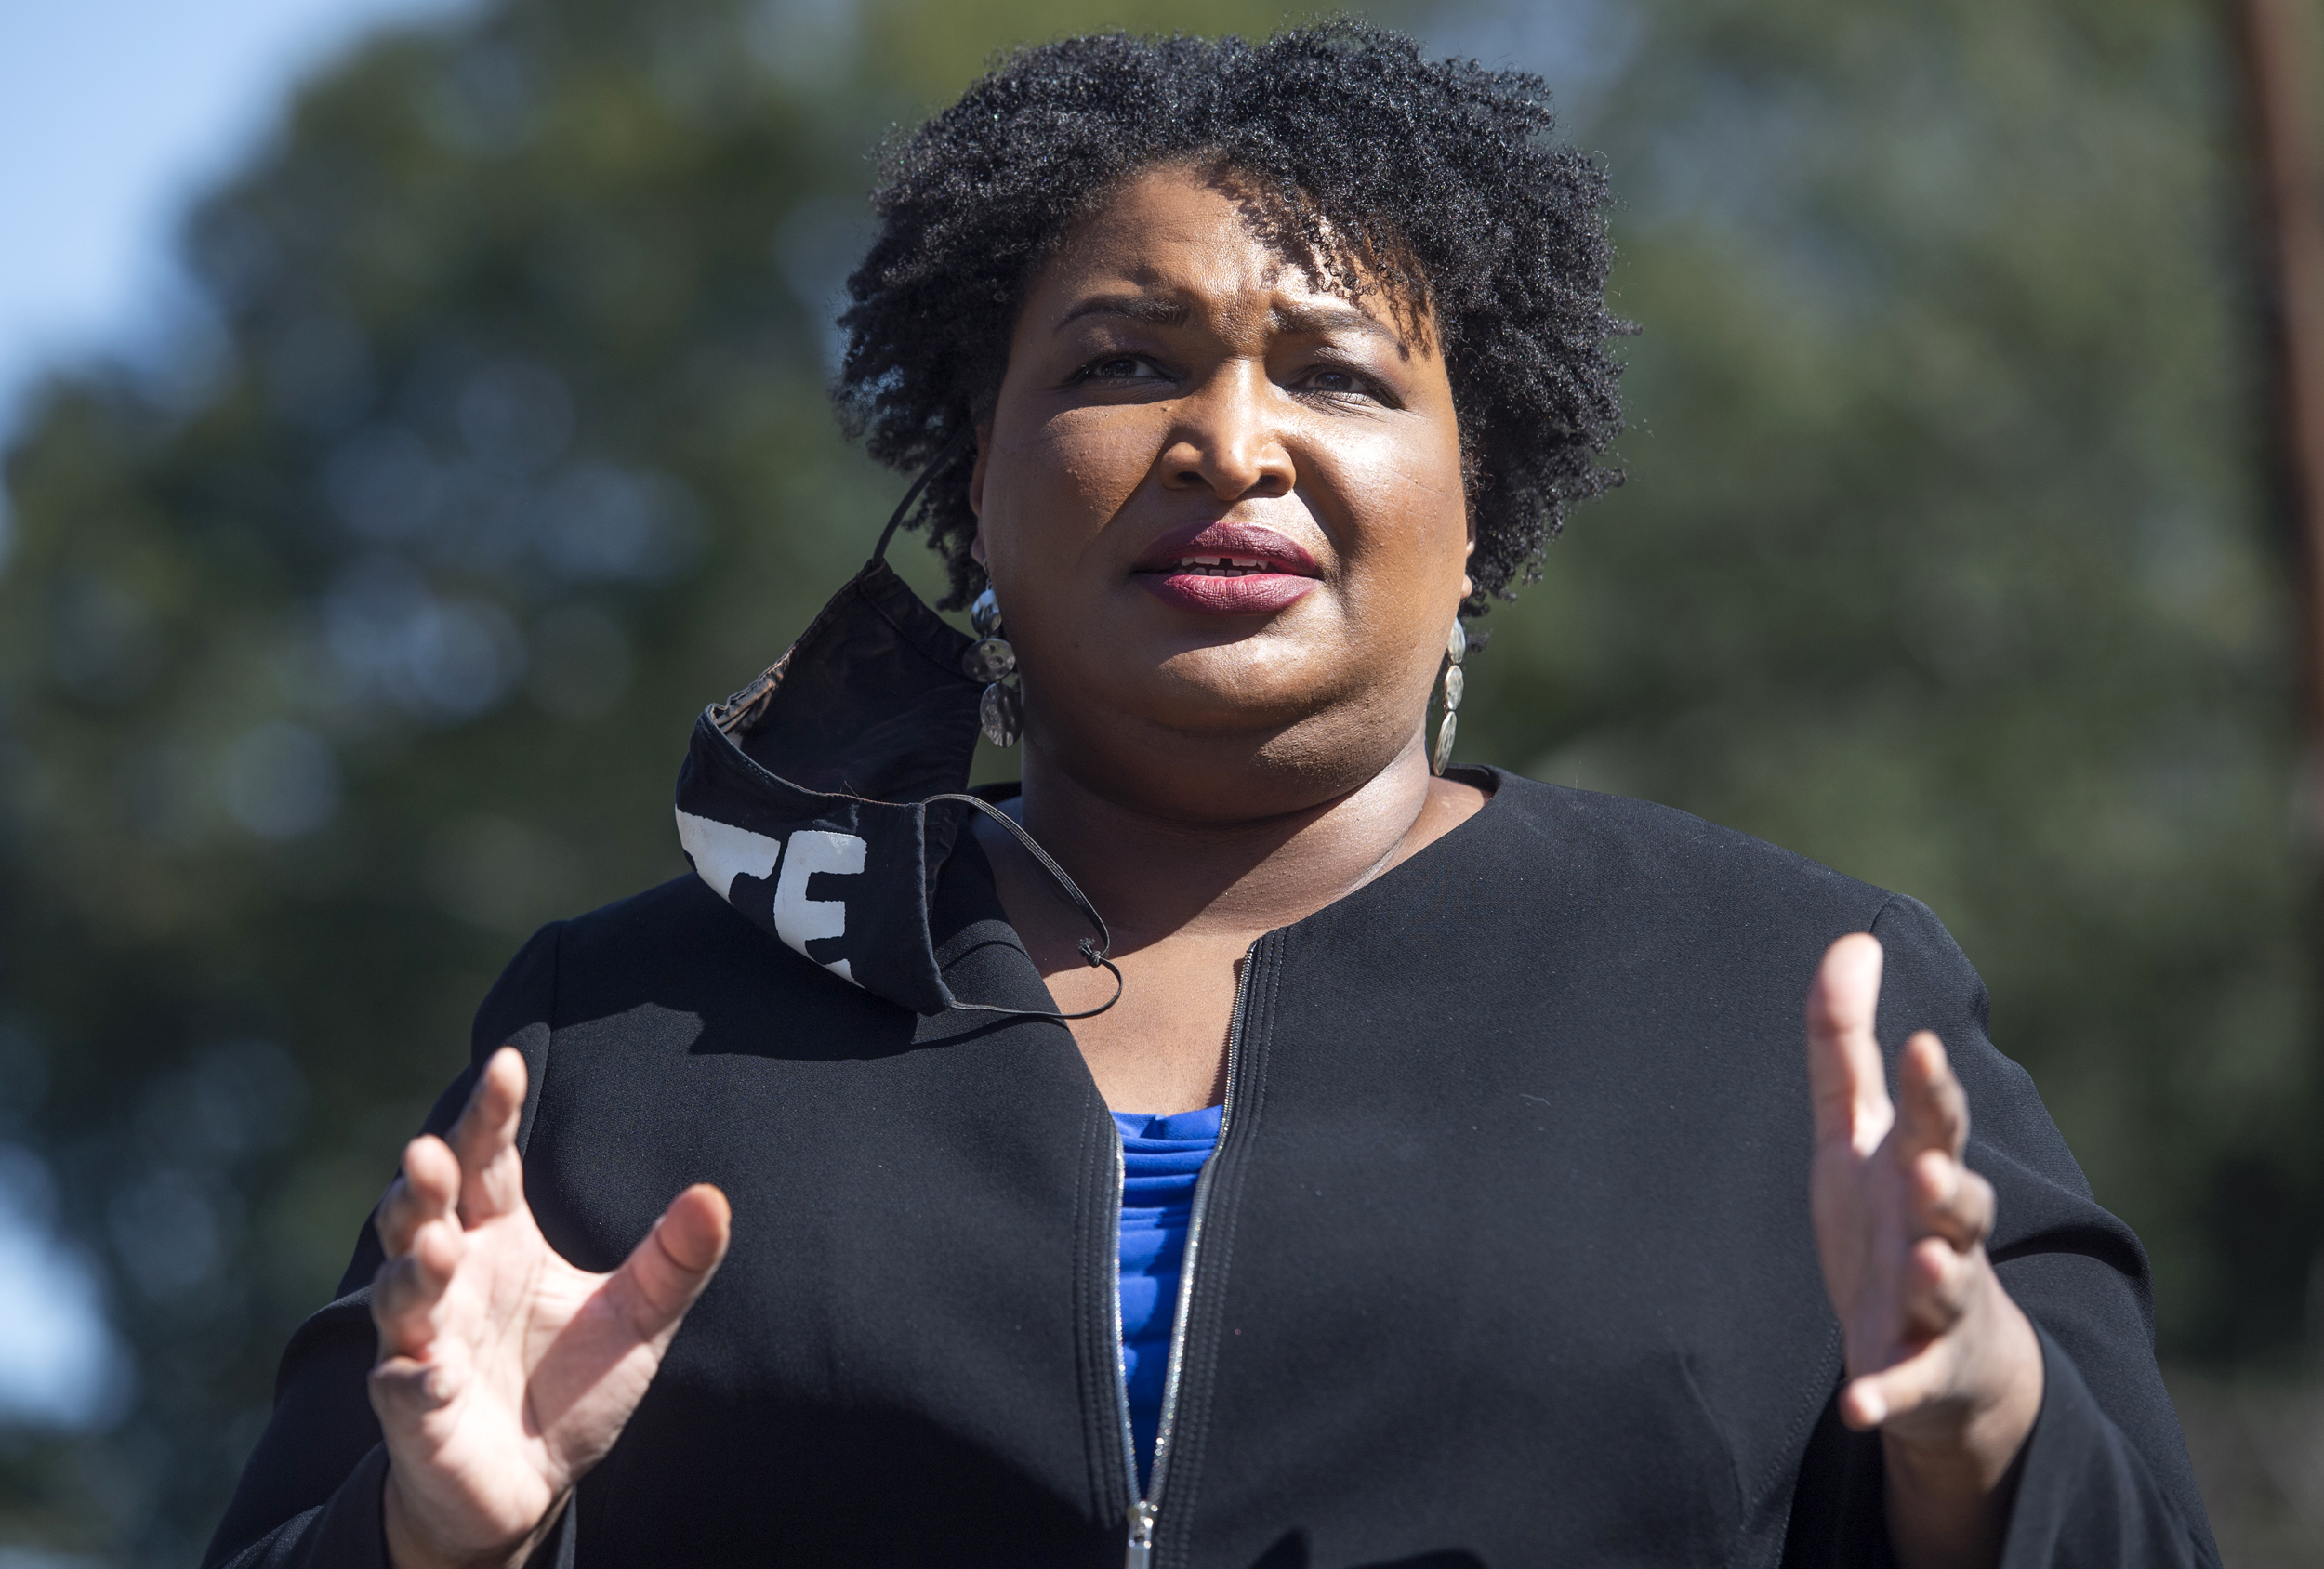 our time is now stacey abrams